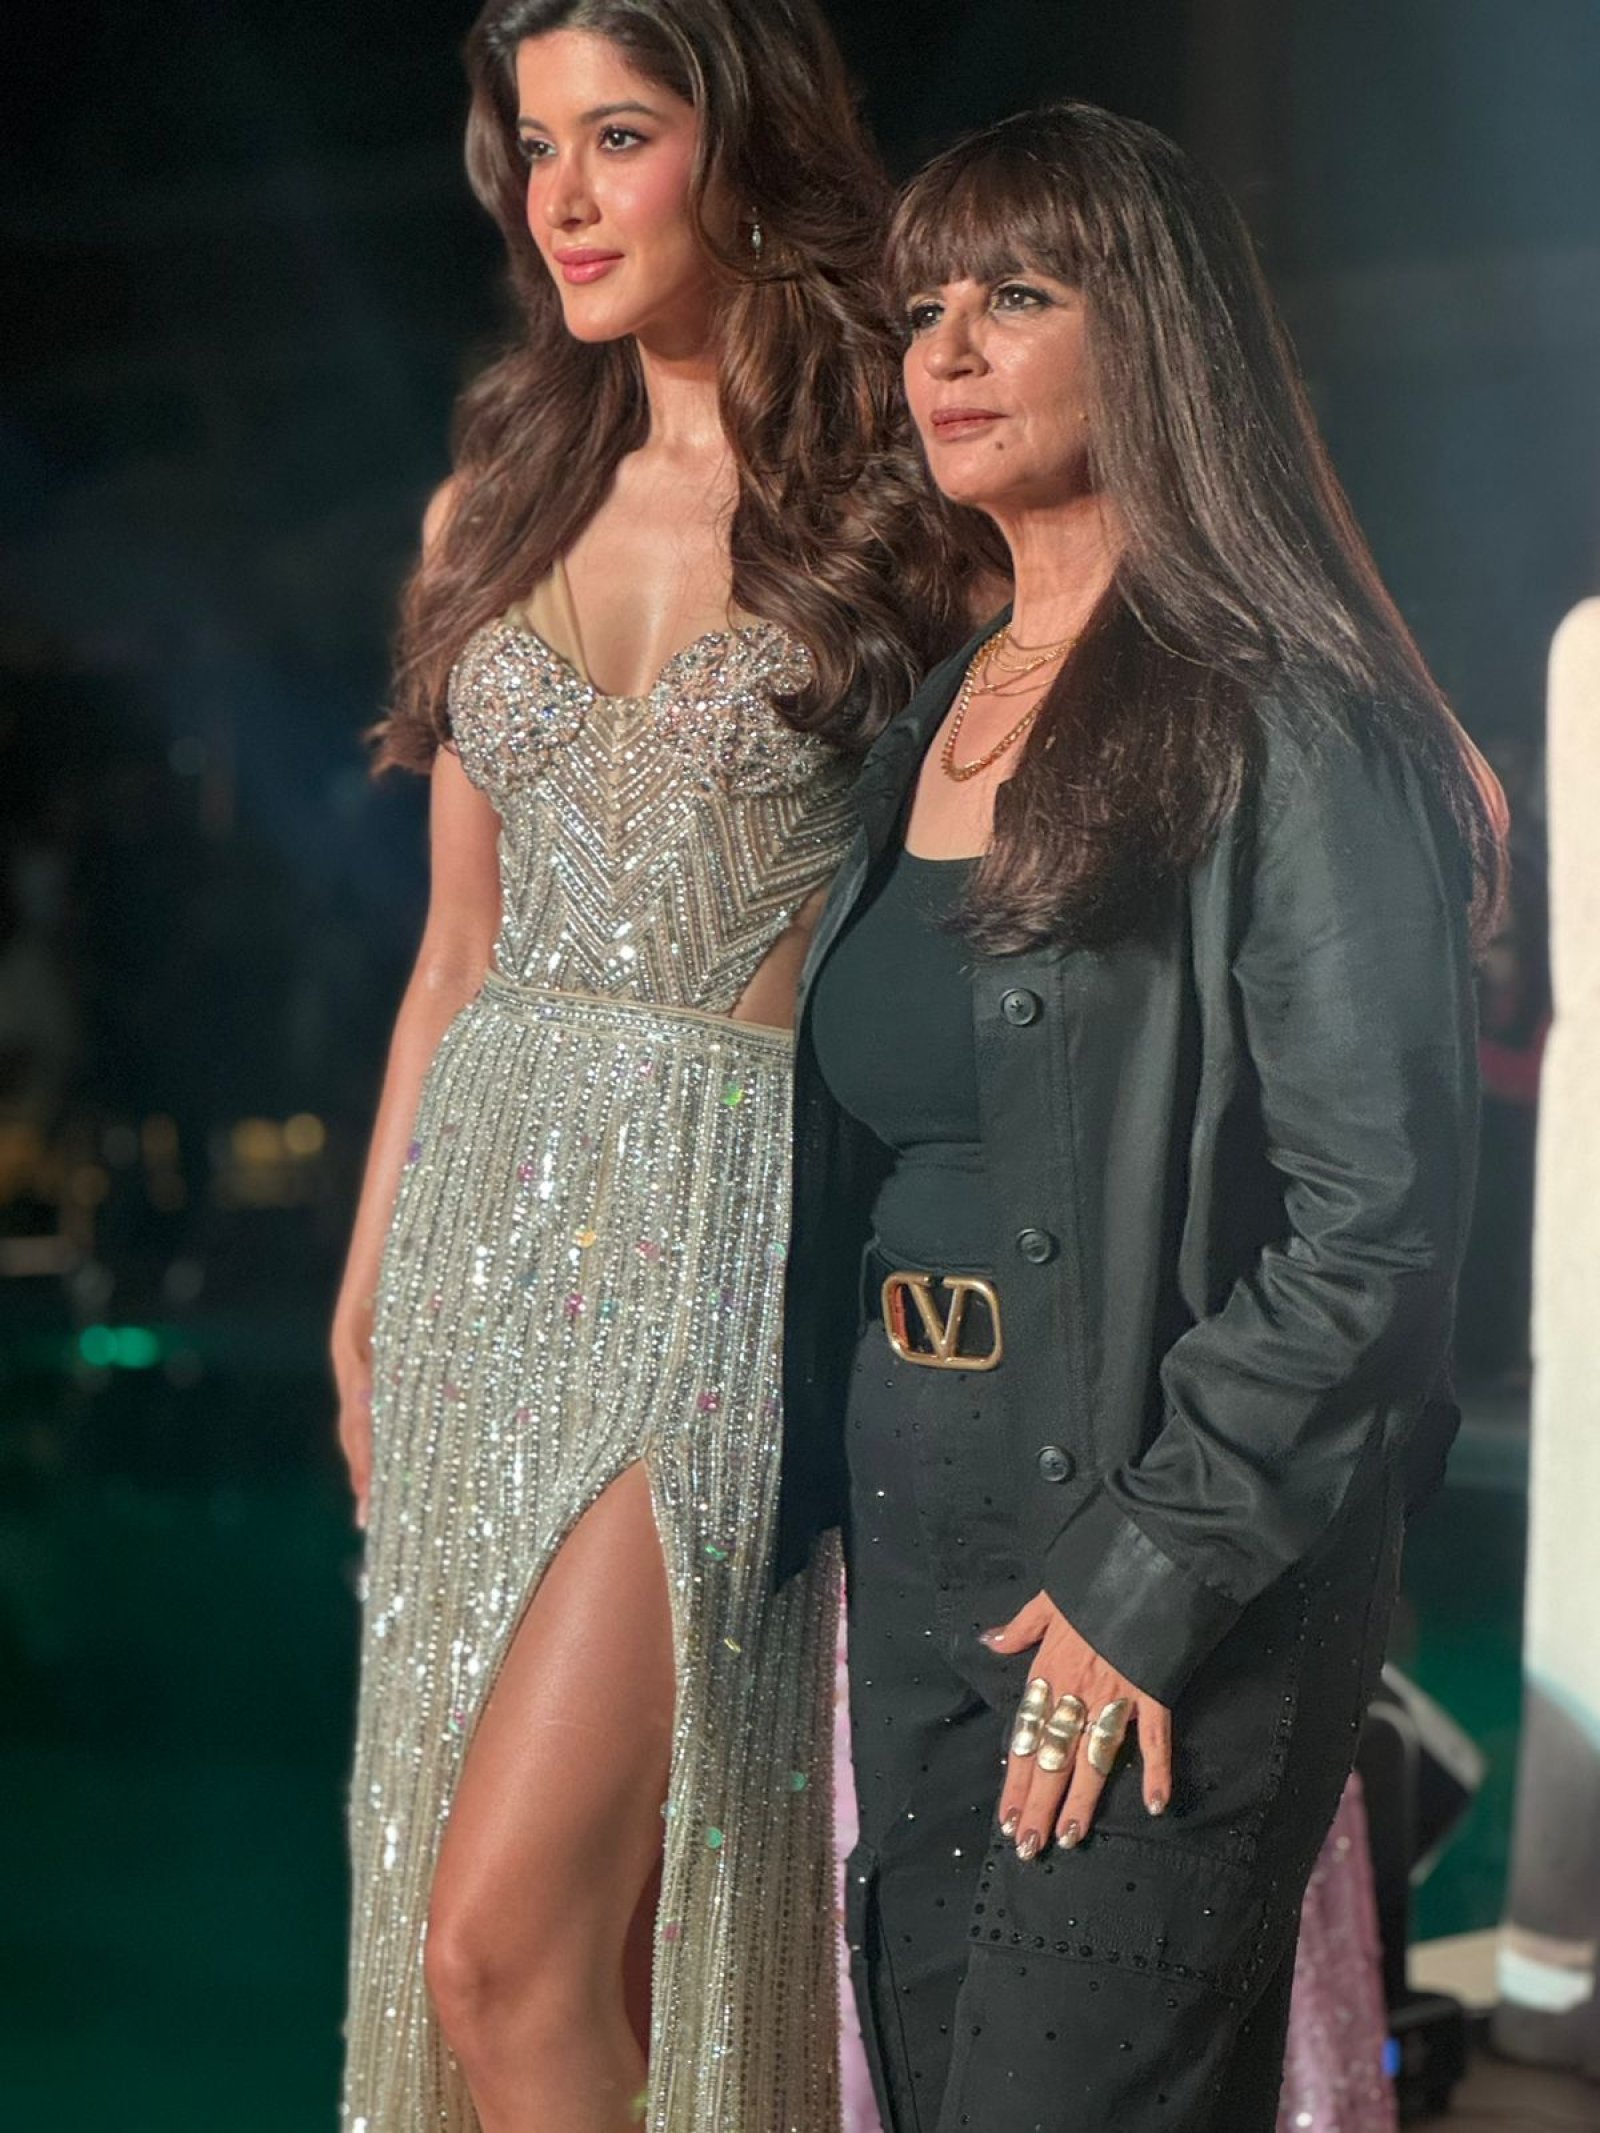 SHANAYA KAPOOR TURNS SHOWSTOPPER FOR THE LEGENDARY NEETA LULLA AT THE LAUNCH OF HER NEW COLLECTION 'NISSHK' BY HOUSE OF NEETA LULLA